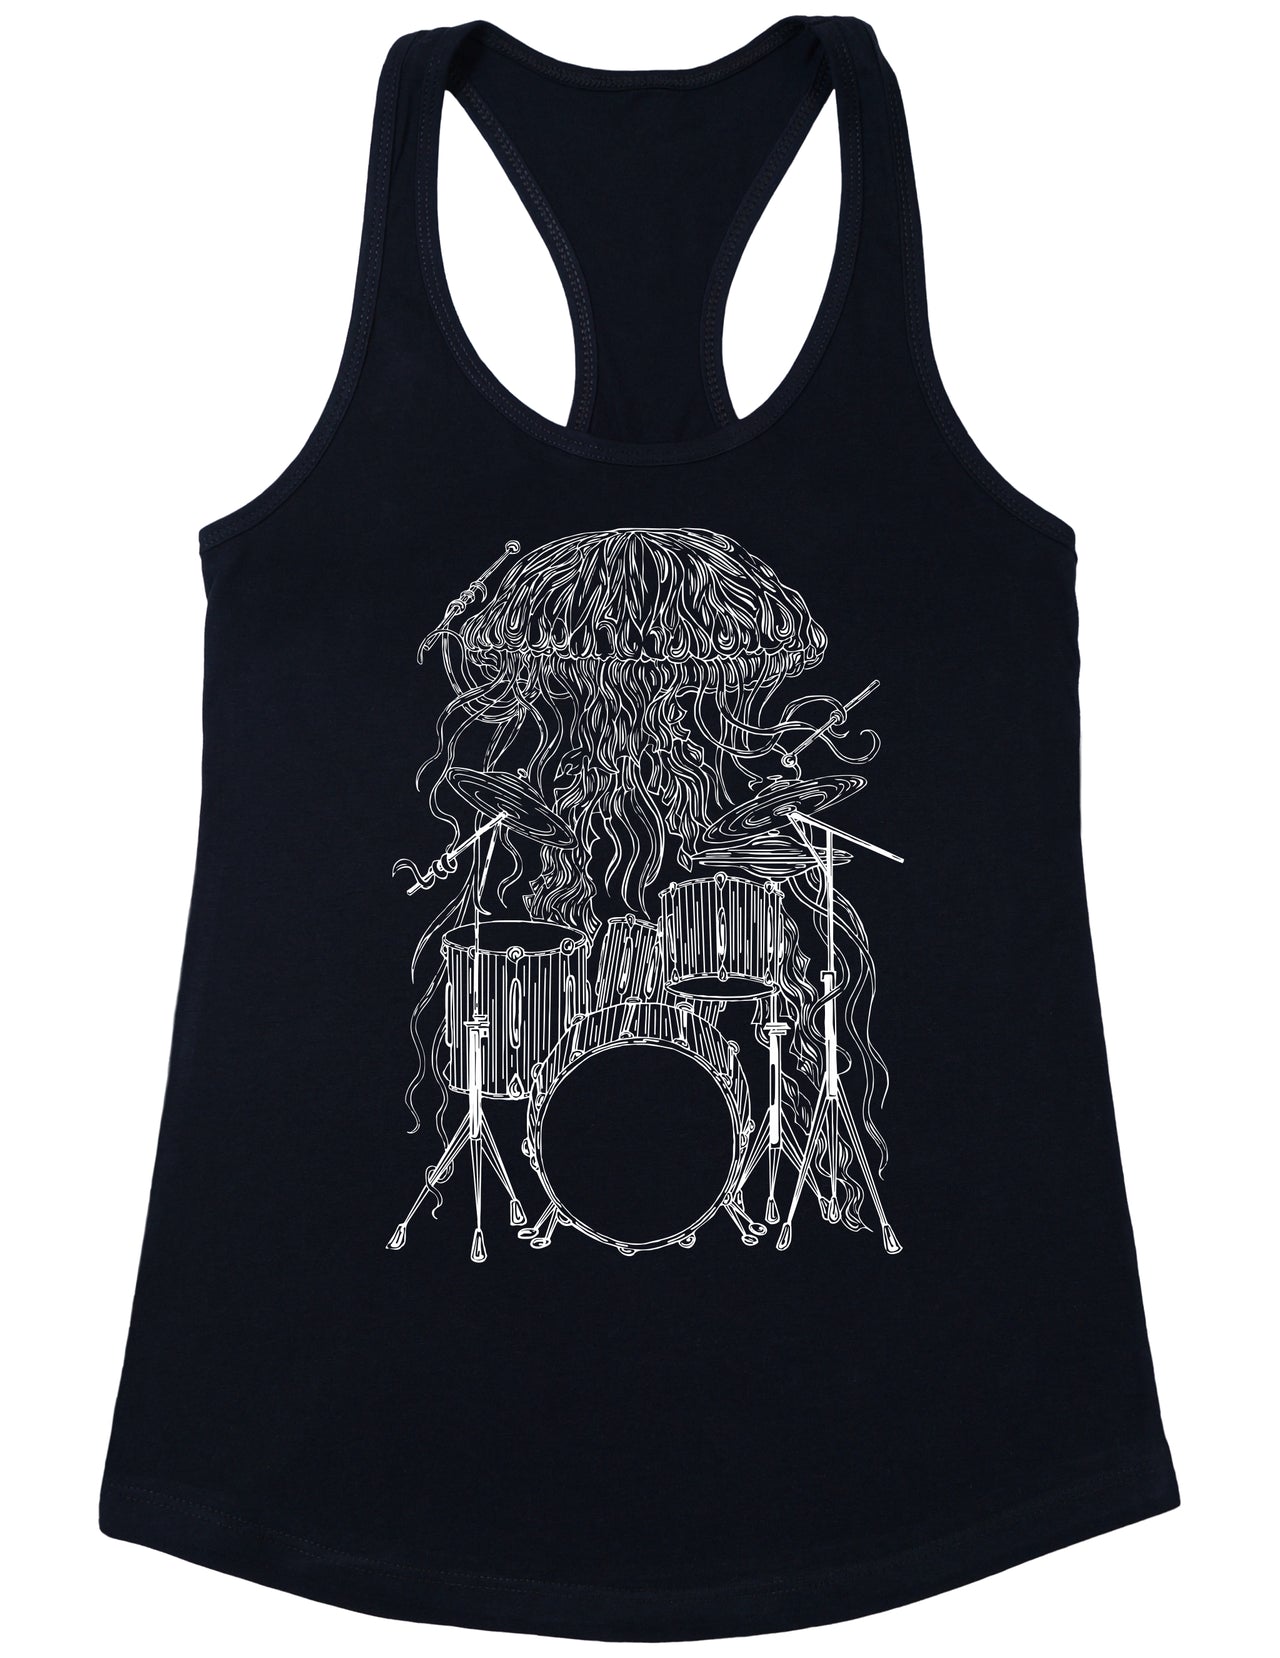 SEEMBO Jellyfish Playing Drums Women's Poly-Cotton Tank Top